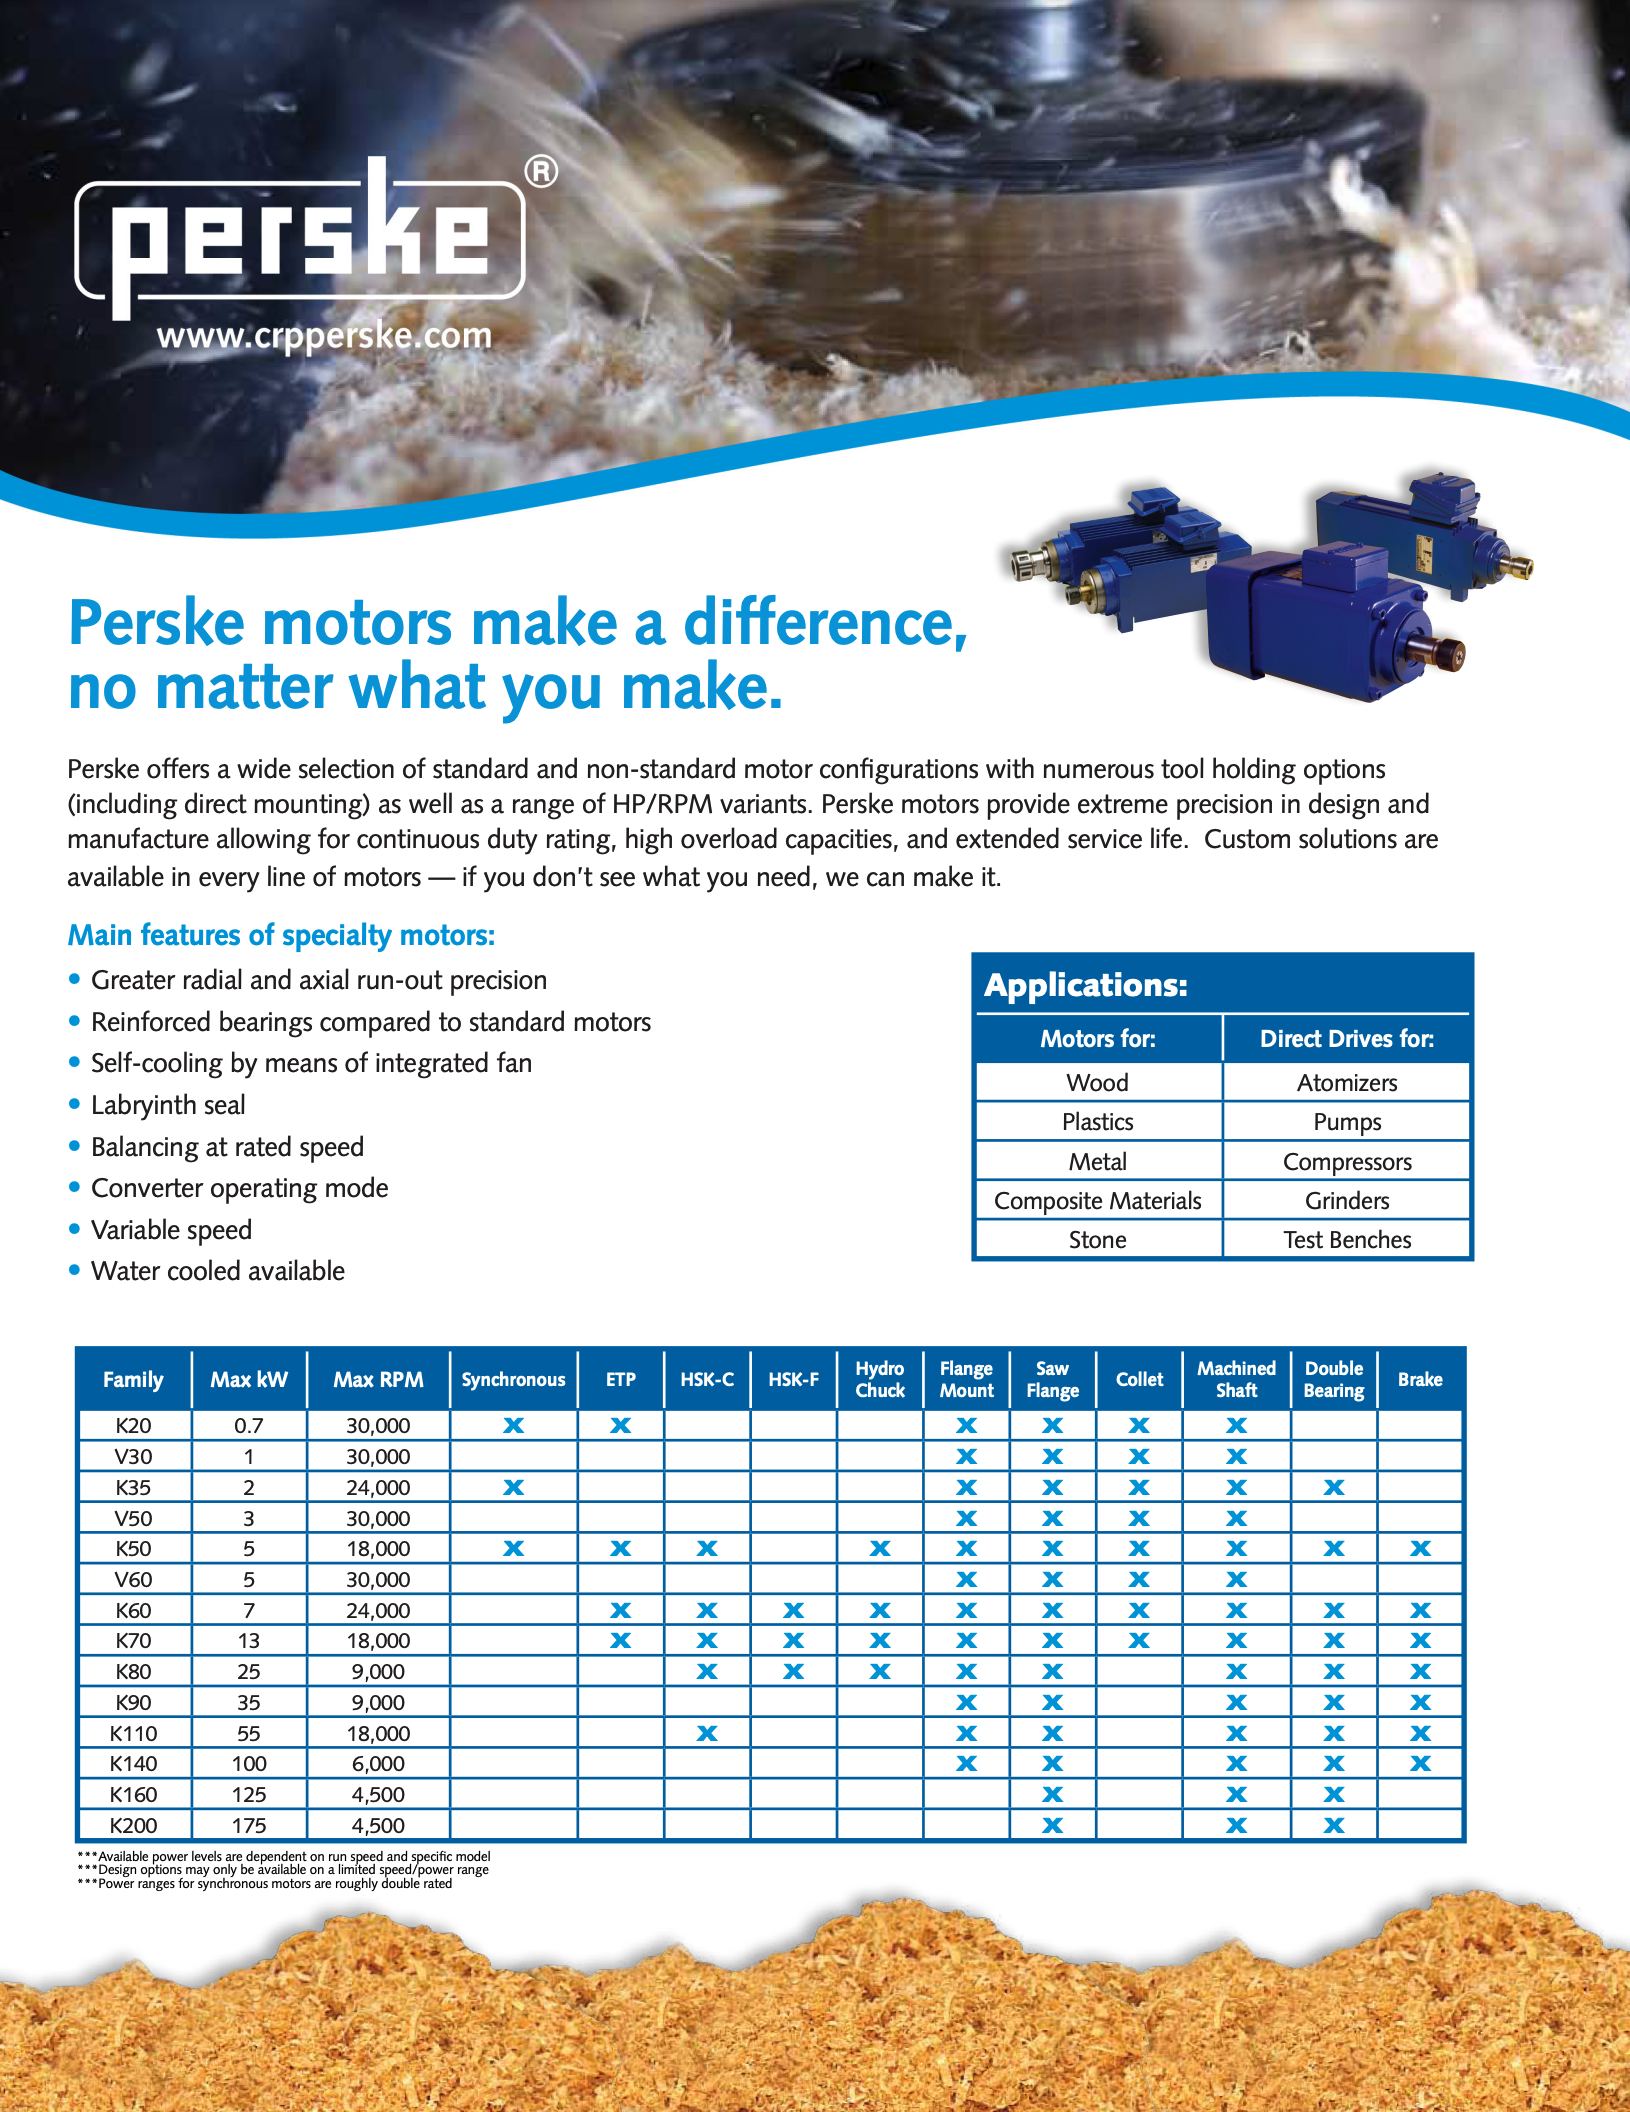 Perske motors make a difference no matter what you make.